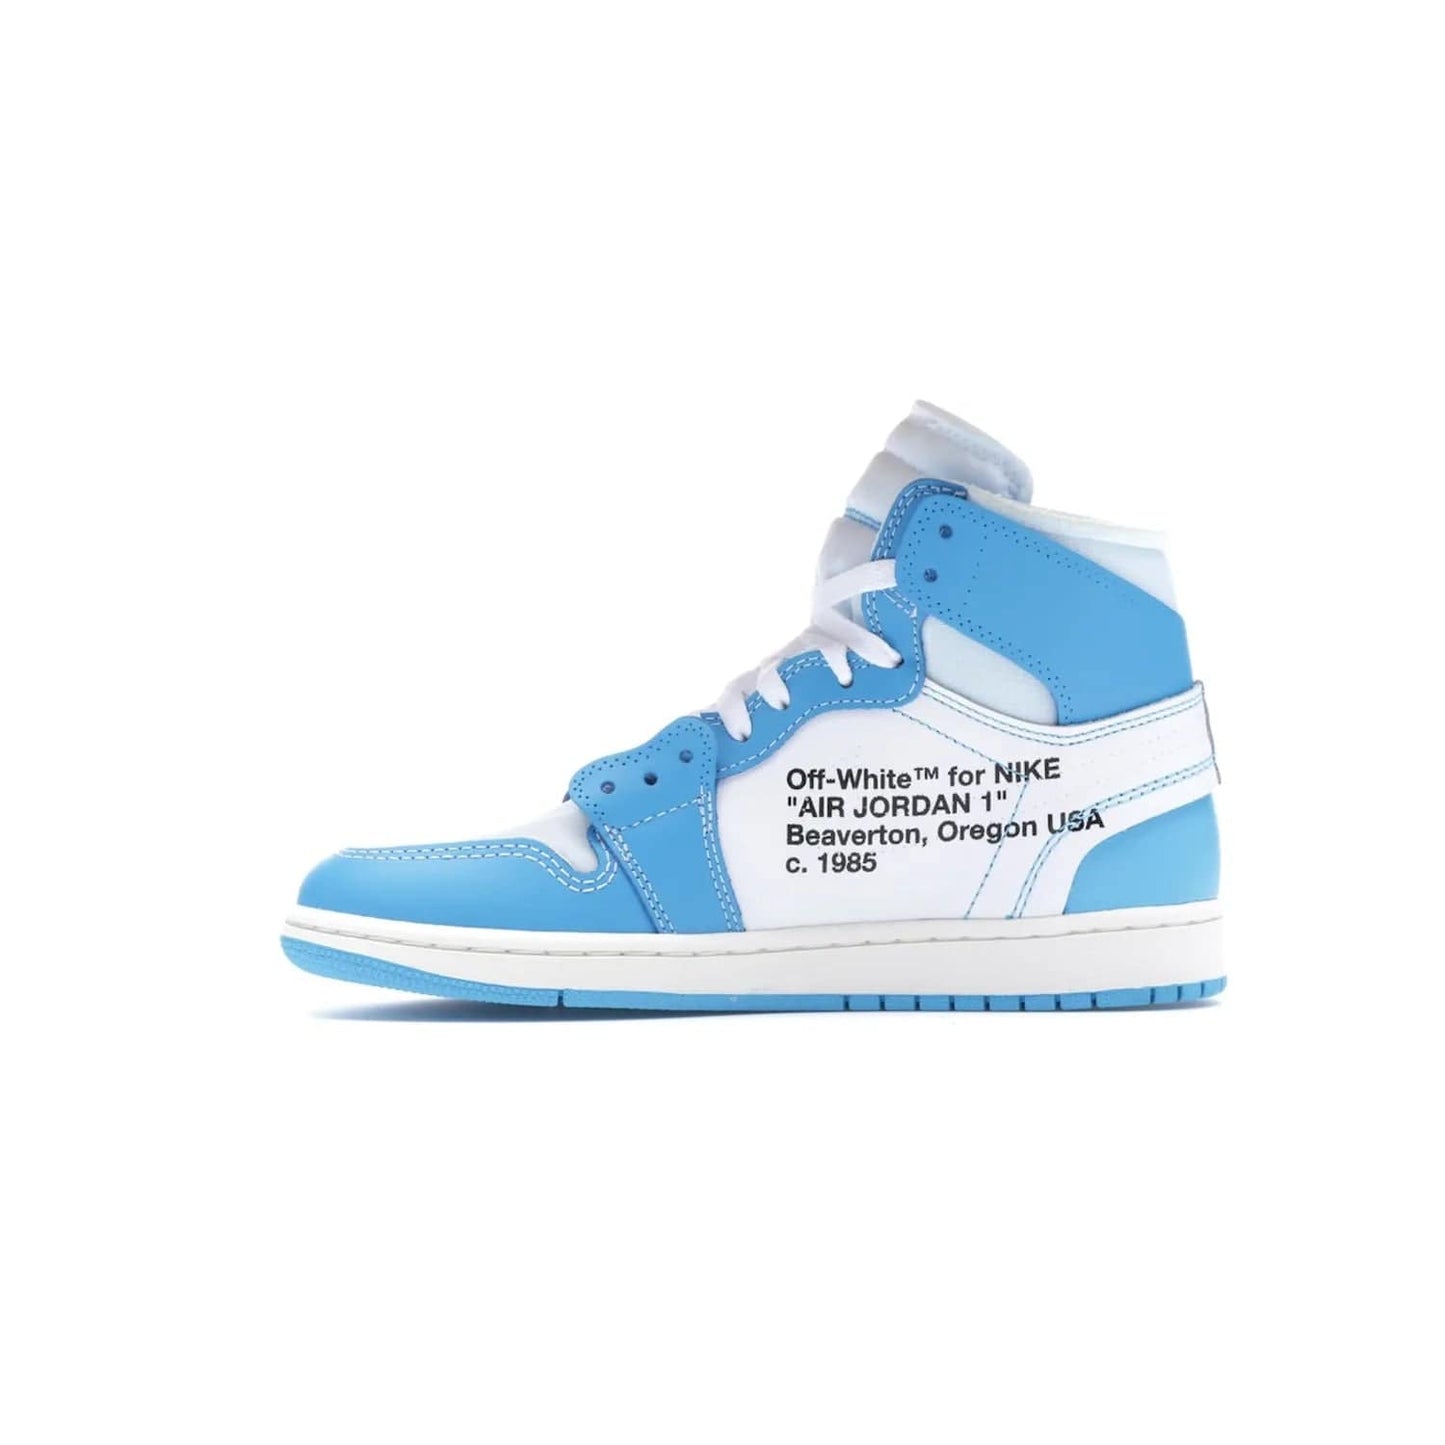 Jordan 1 Retro High Off-White University Blue - Image 19 - Only at www.BallersClubKickz.com - Classic Jordan 1 Retro High "Off-White UNC" sneakers meld style and comfort. Boasting deconstructed white and blue leather, Off-White detailing, and a white, dark powder blue and cone colorway, these sneakers are perfect for dressing up or down. Get the iconic Off-White Jordan 1's and upgrade your look.